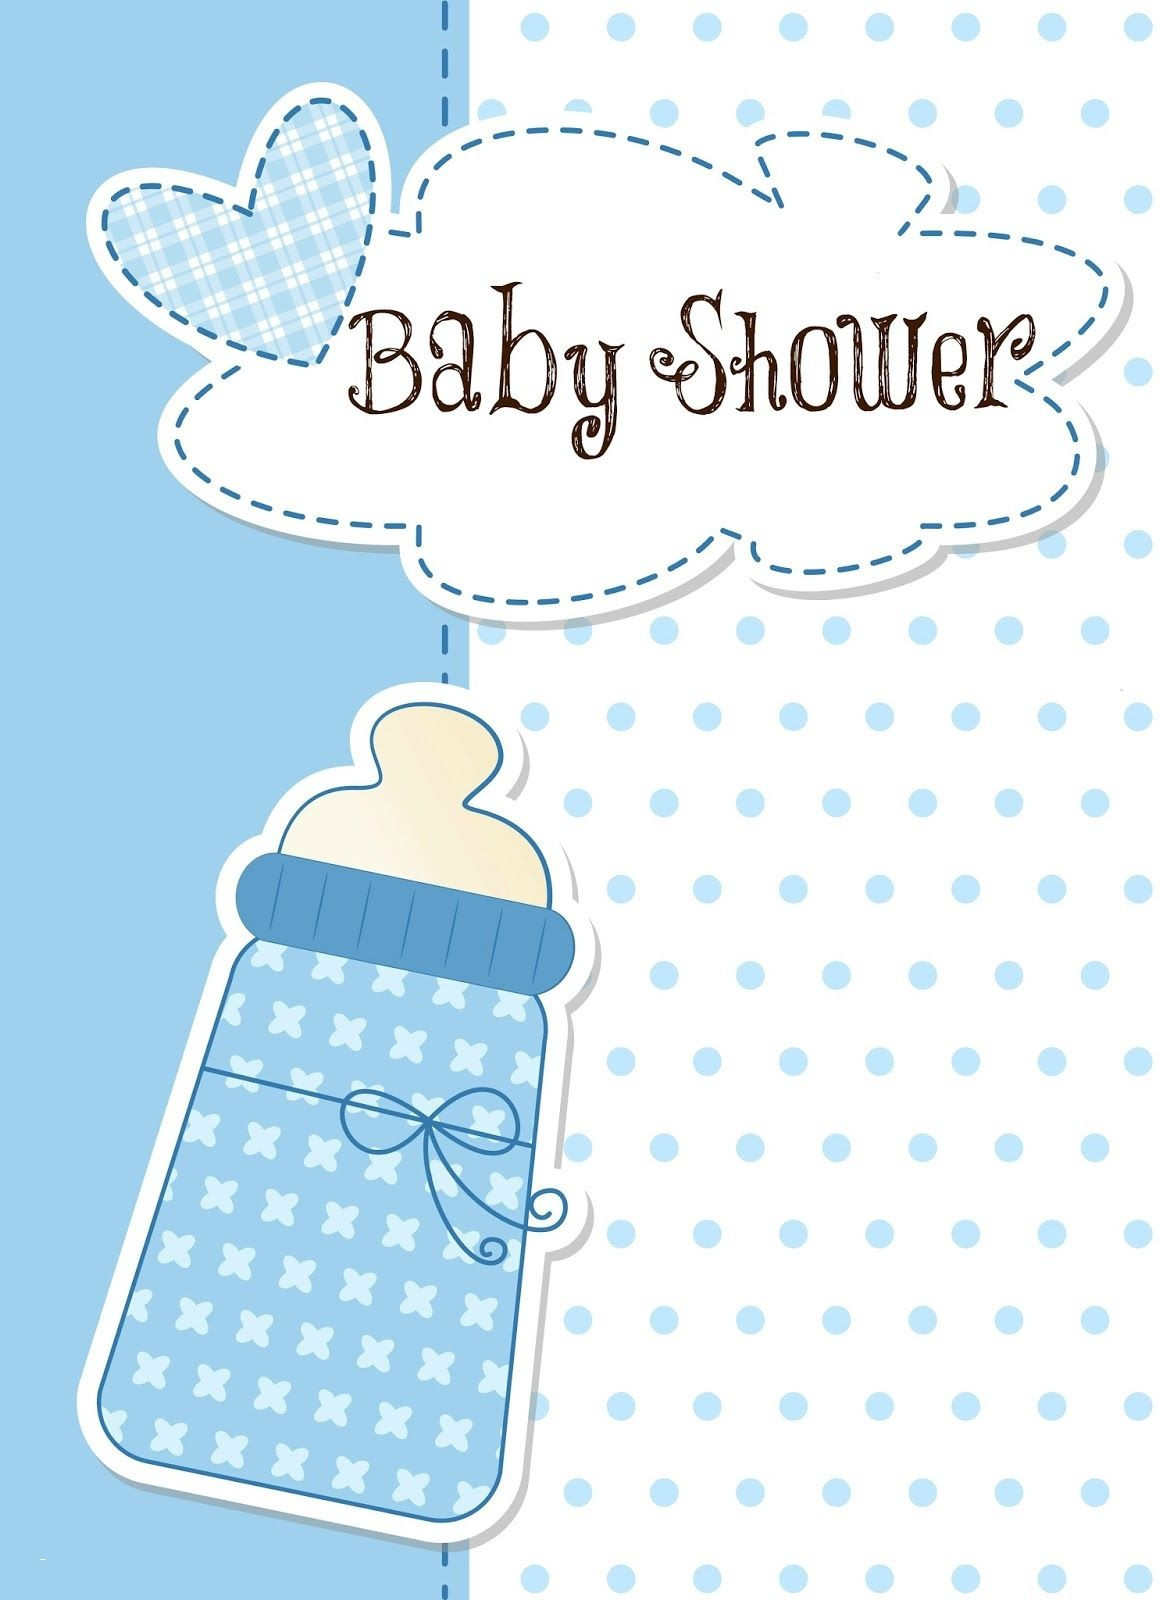 24 Unique Baby Blue Vase 2024 free download baby blue vase of baby banner clipart beautiful will clipart colored flower vase clip for baby banner clipart luxury baby esie template for baby shower invitations jossgarman of baby banner 